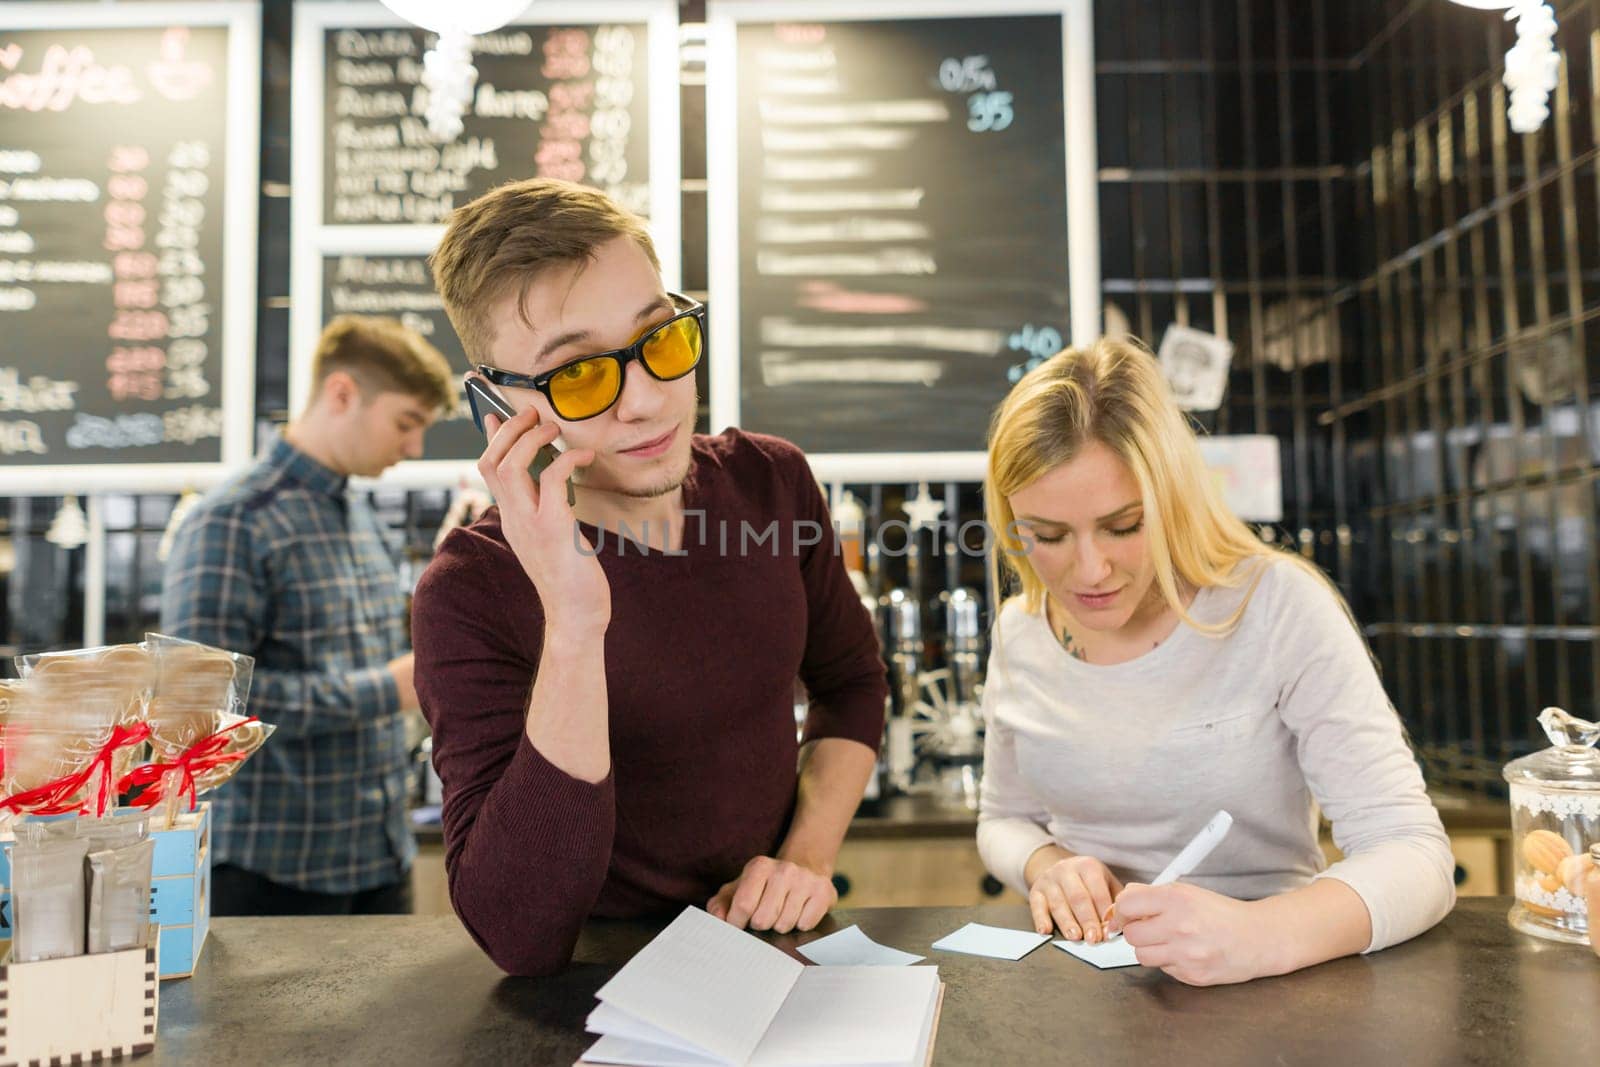 Young people working in coffee shop, man and woman barista near bar counter, receiving order by phone, background coffee machine. Teamwork, staff, small business, people concept.